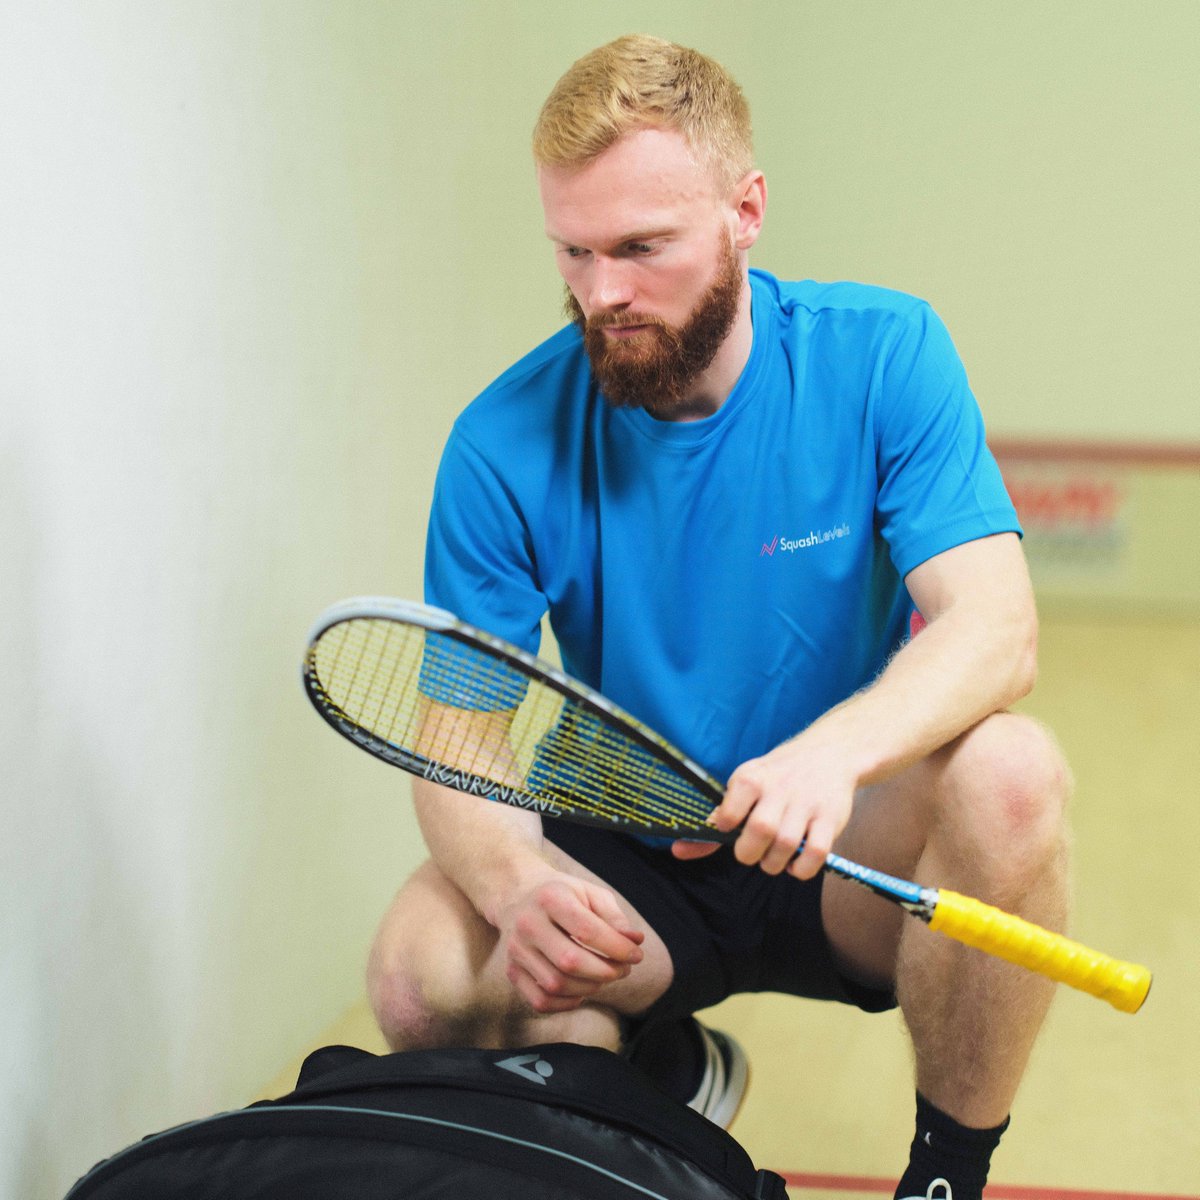 You've worked hard to earn your level, now you can show it off on court 🔥 Get your @SquashLevels kit now 👉 tinyurl.com/48sebmsw Looking good @JoelMakin